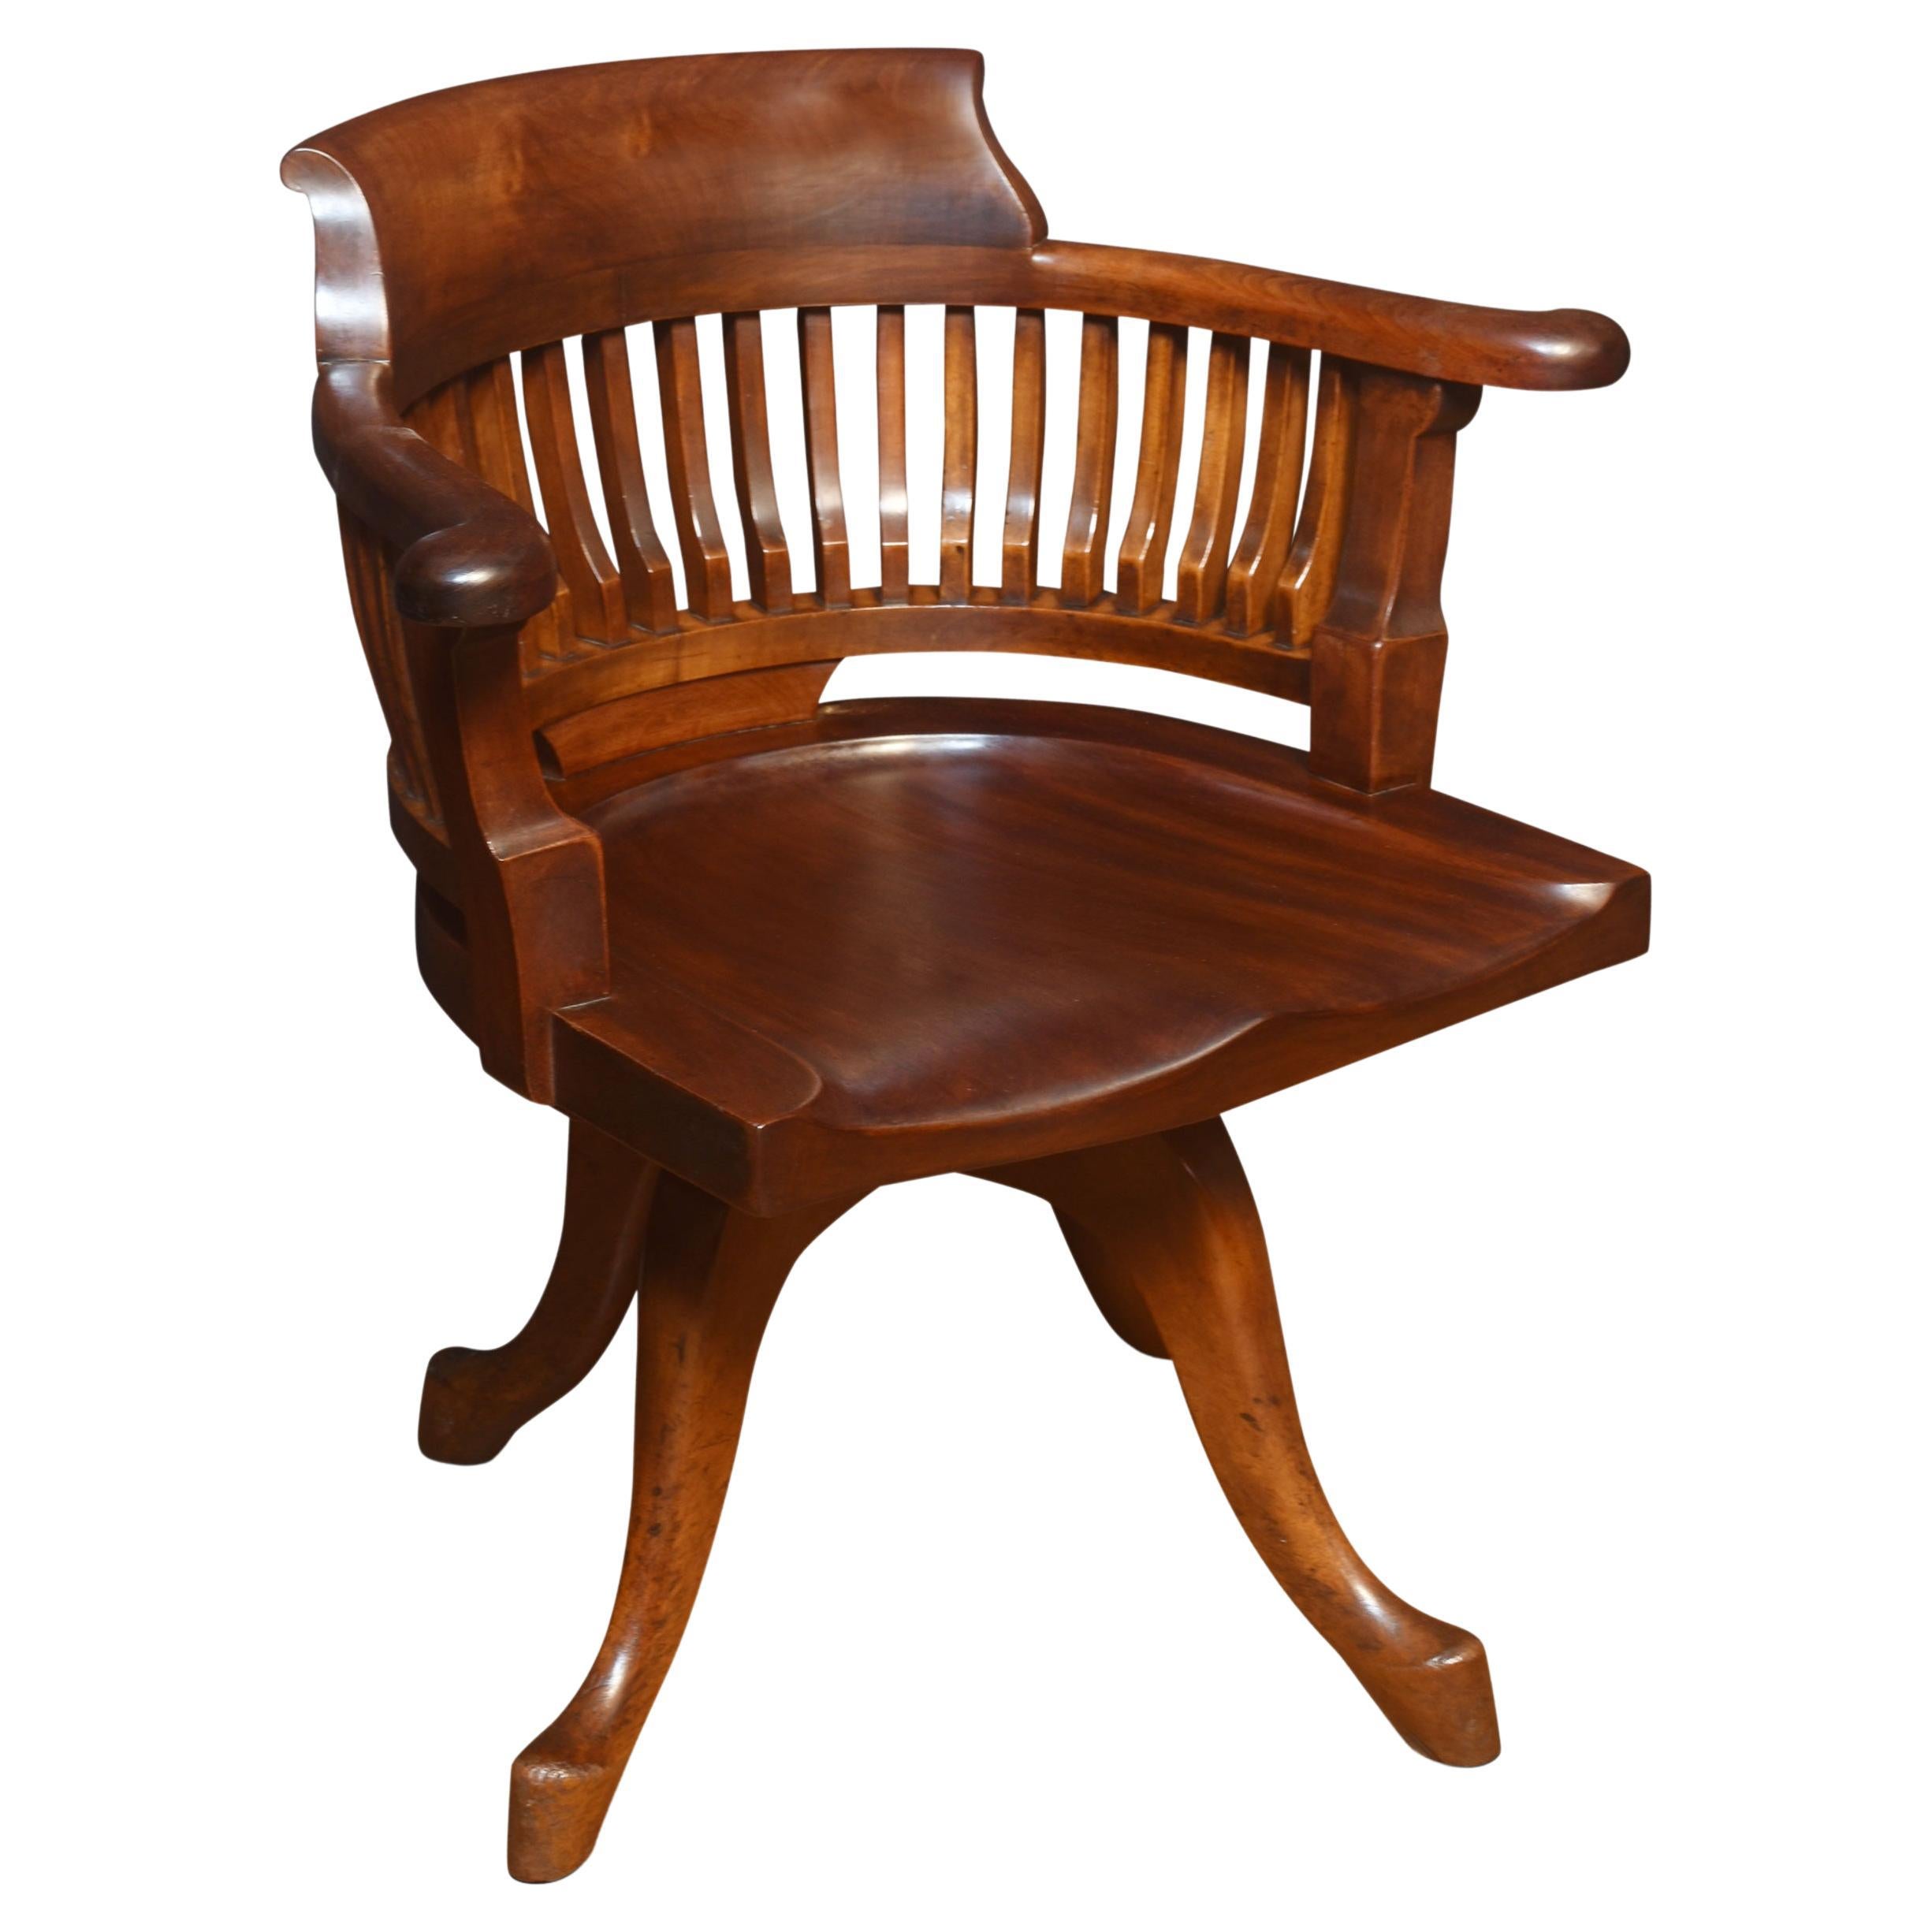 Early 20th Century Mahogany Office / Captain’s Revolving Desk Chair with Shaped